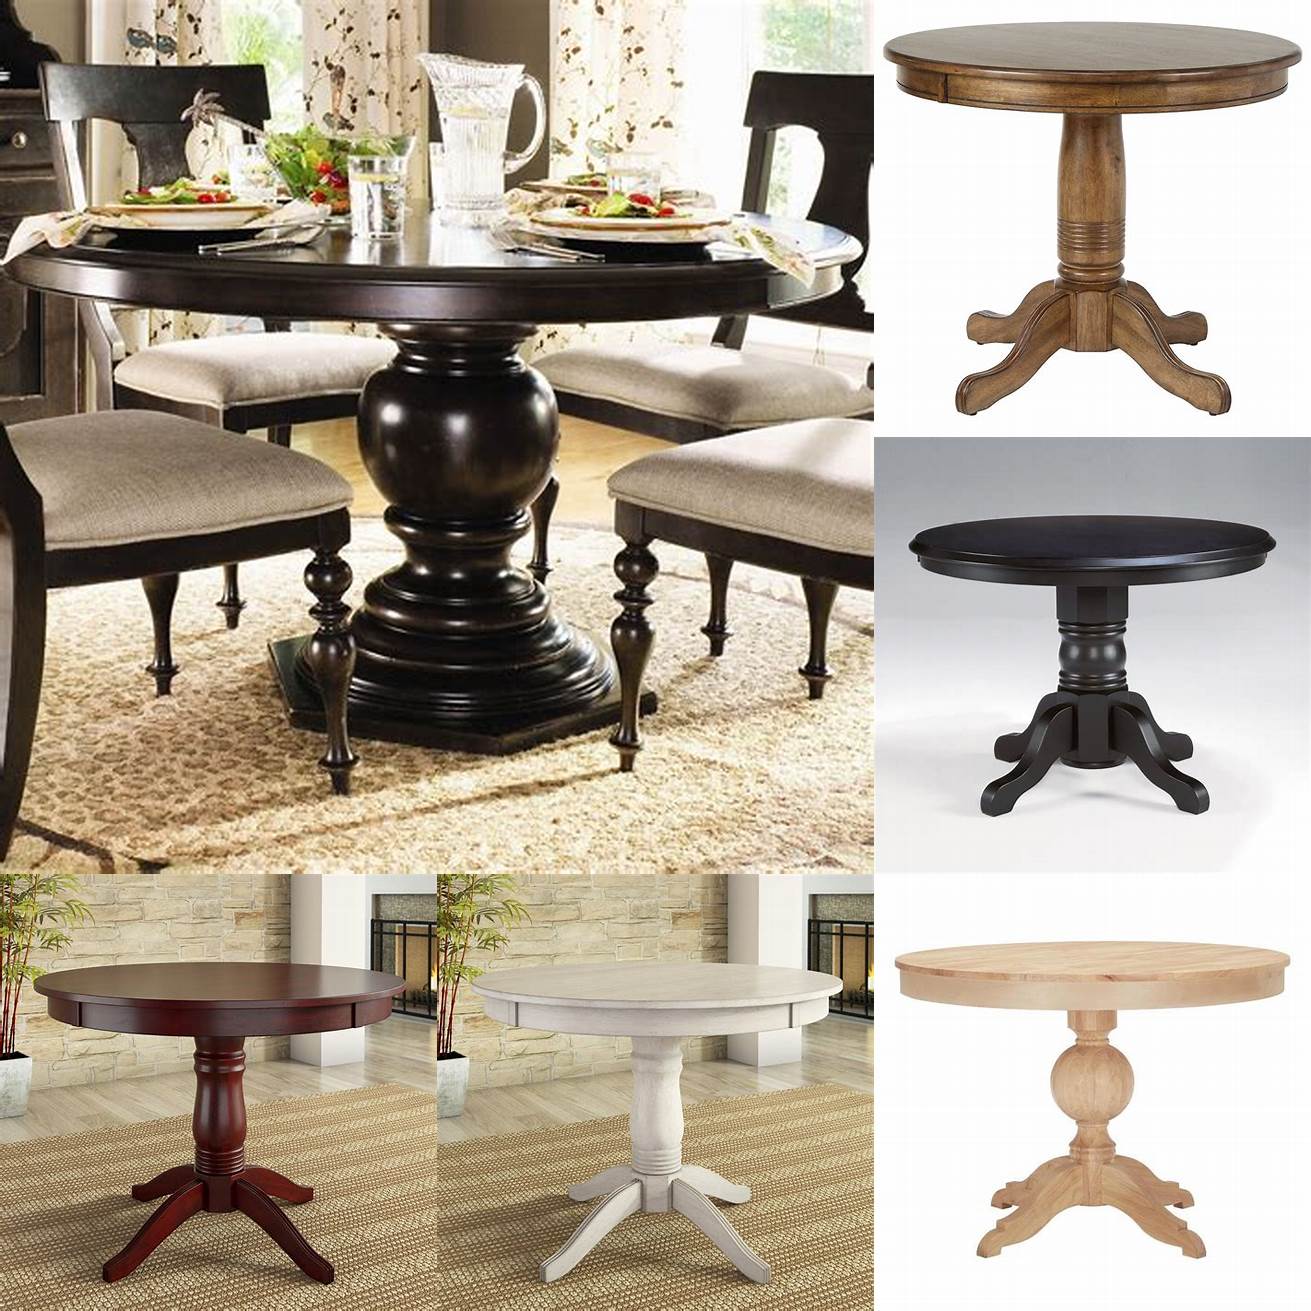 Round table with pedestal base